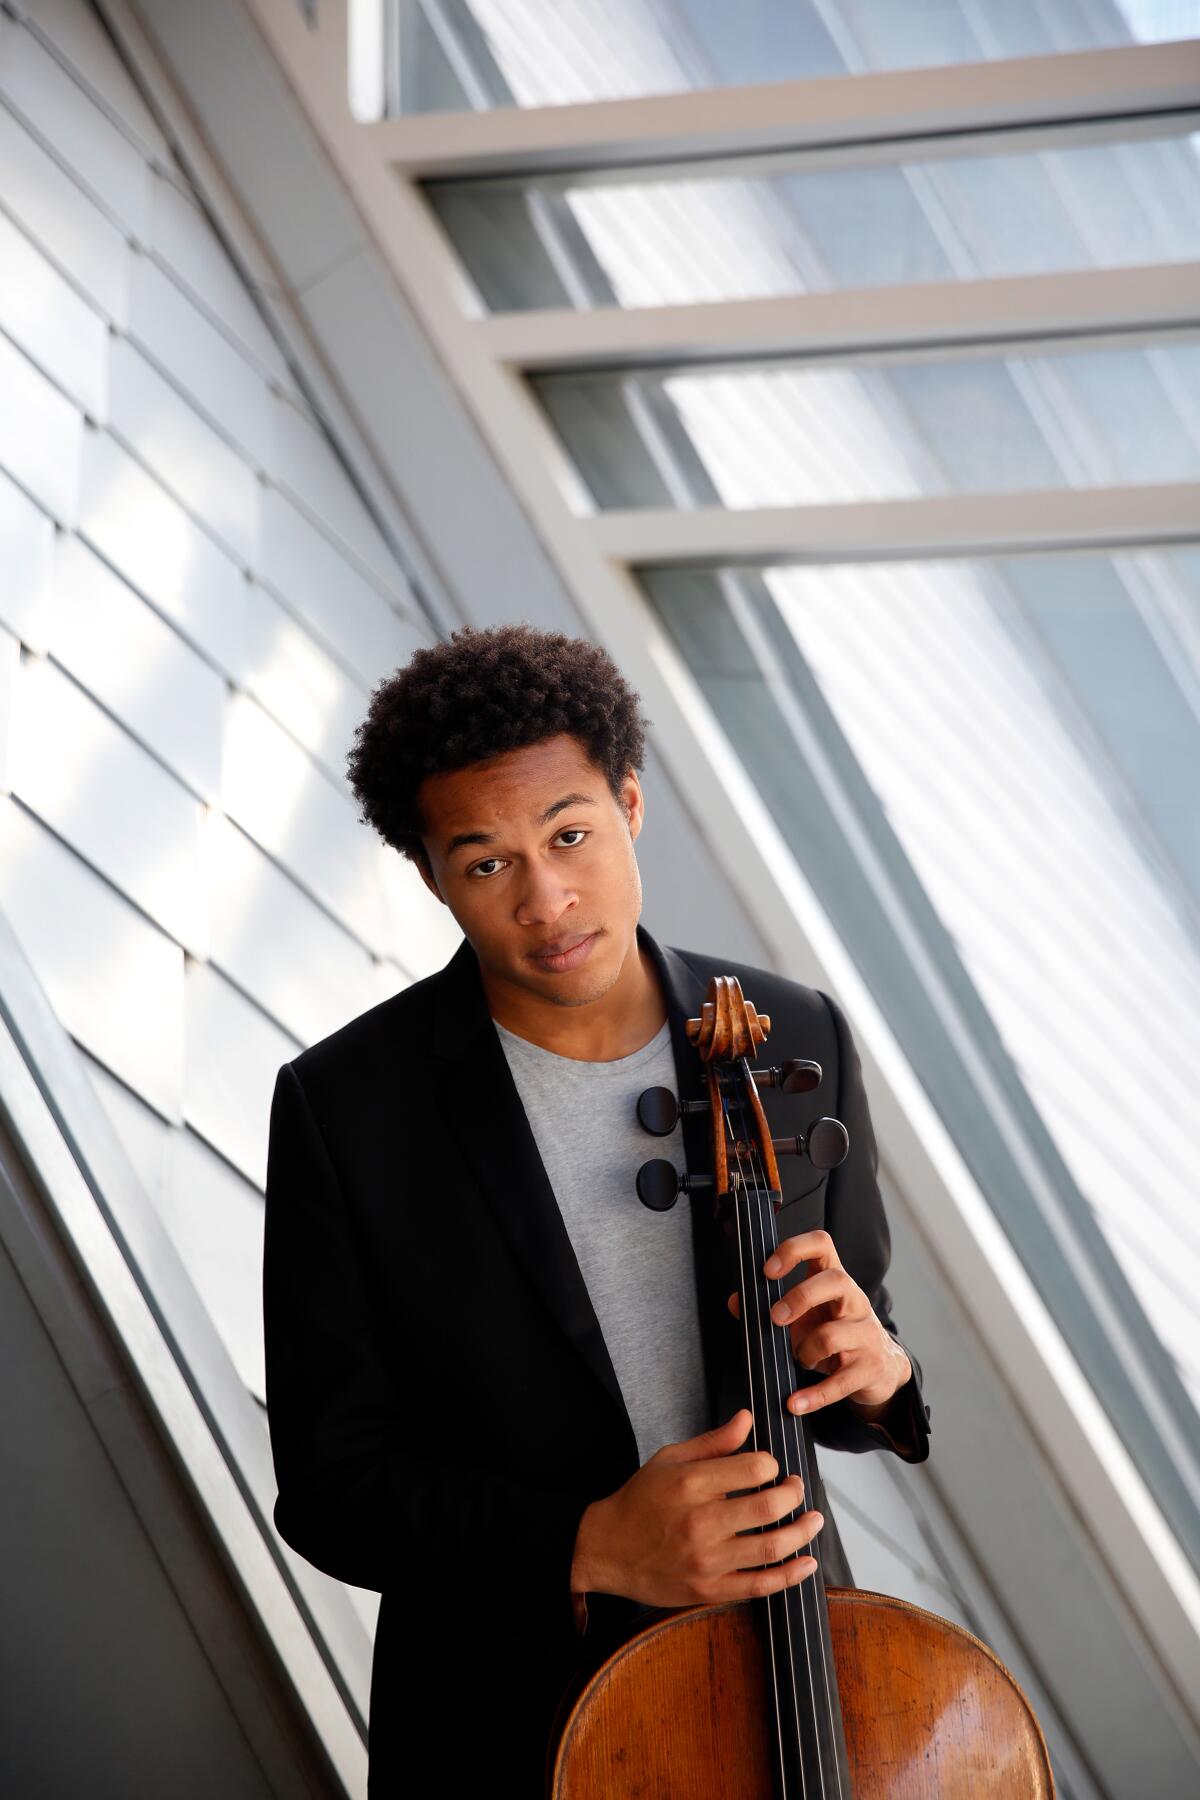 Twenty-year-old cello star Sheku Kanneh-Mason photographed at the Colburn School in Los Angeles.